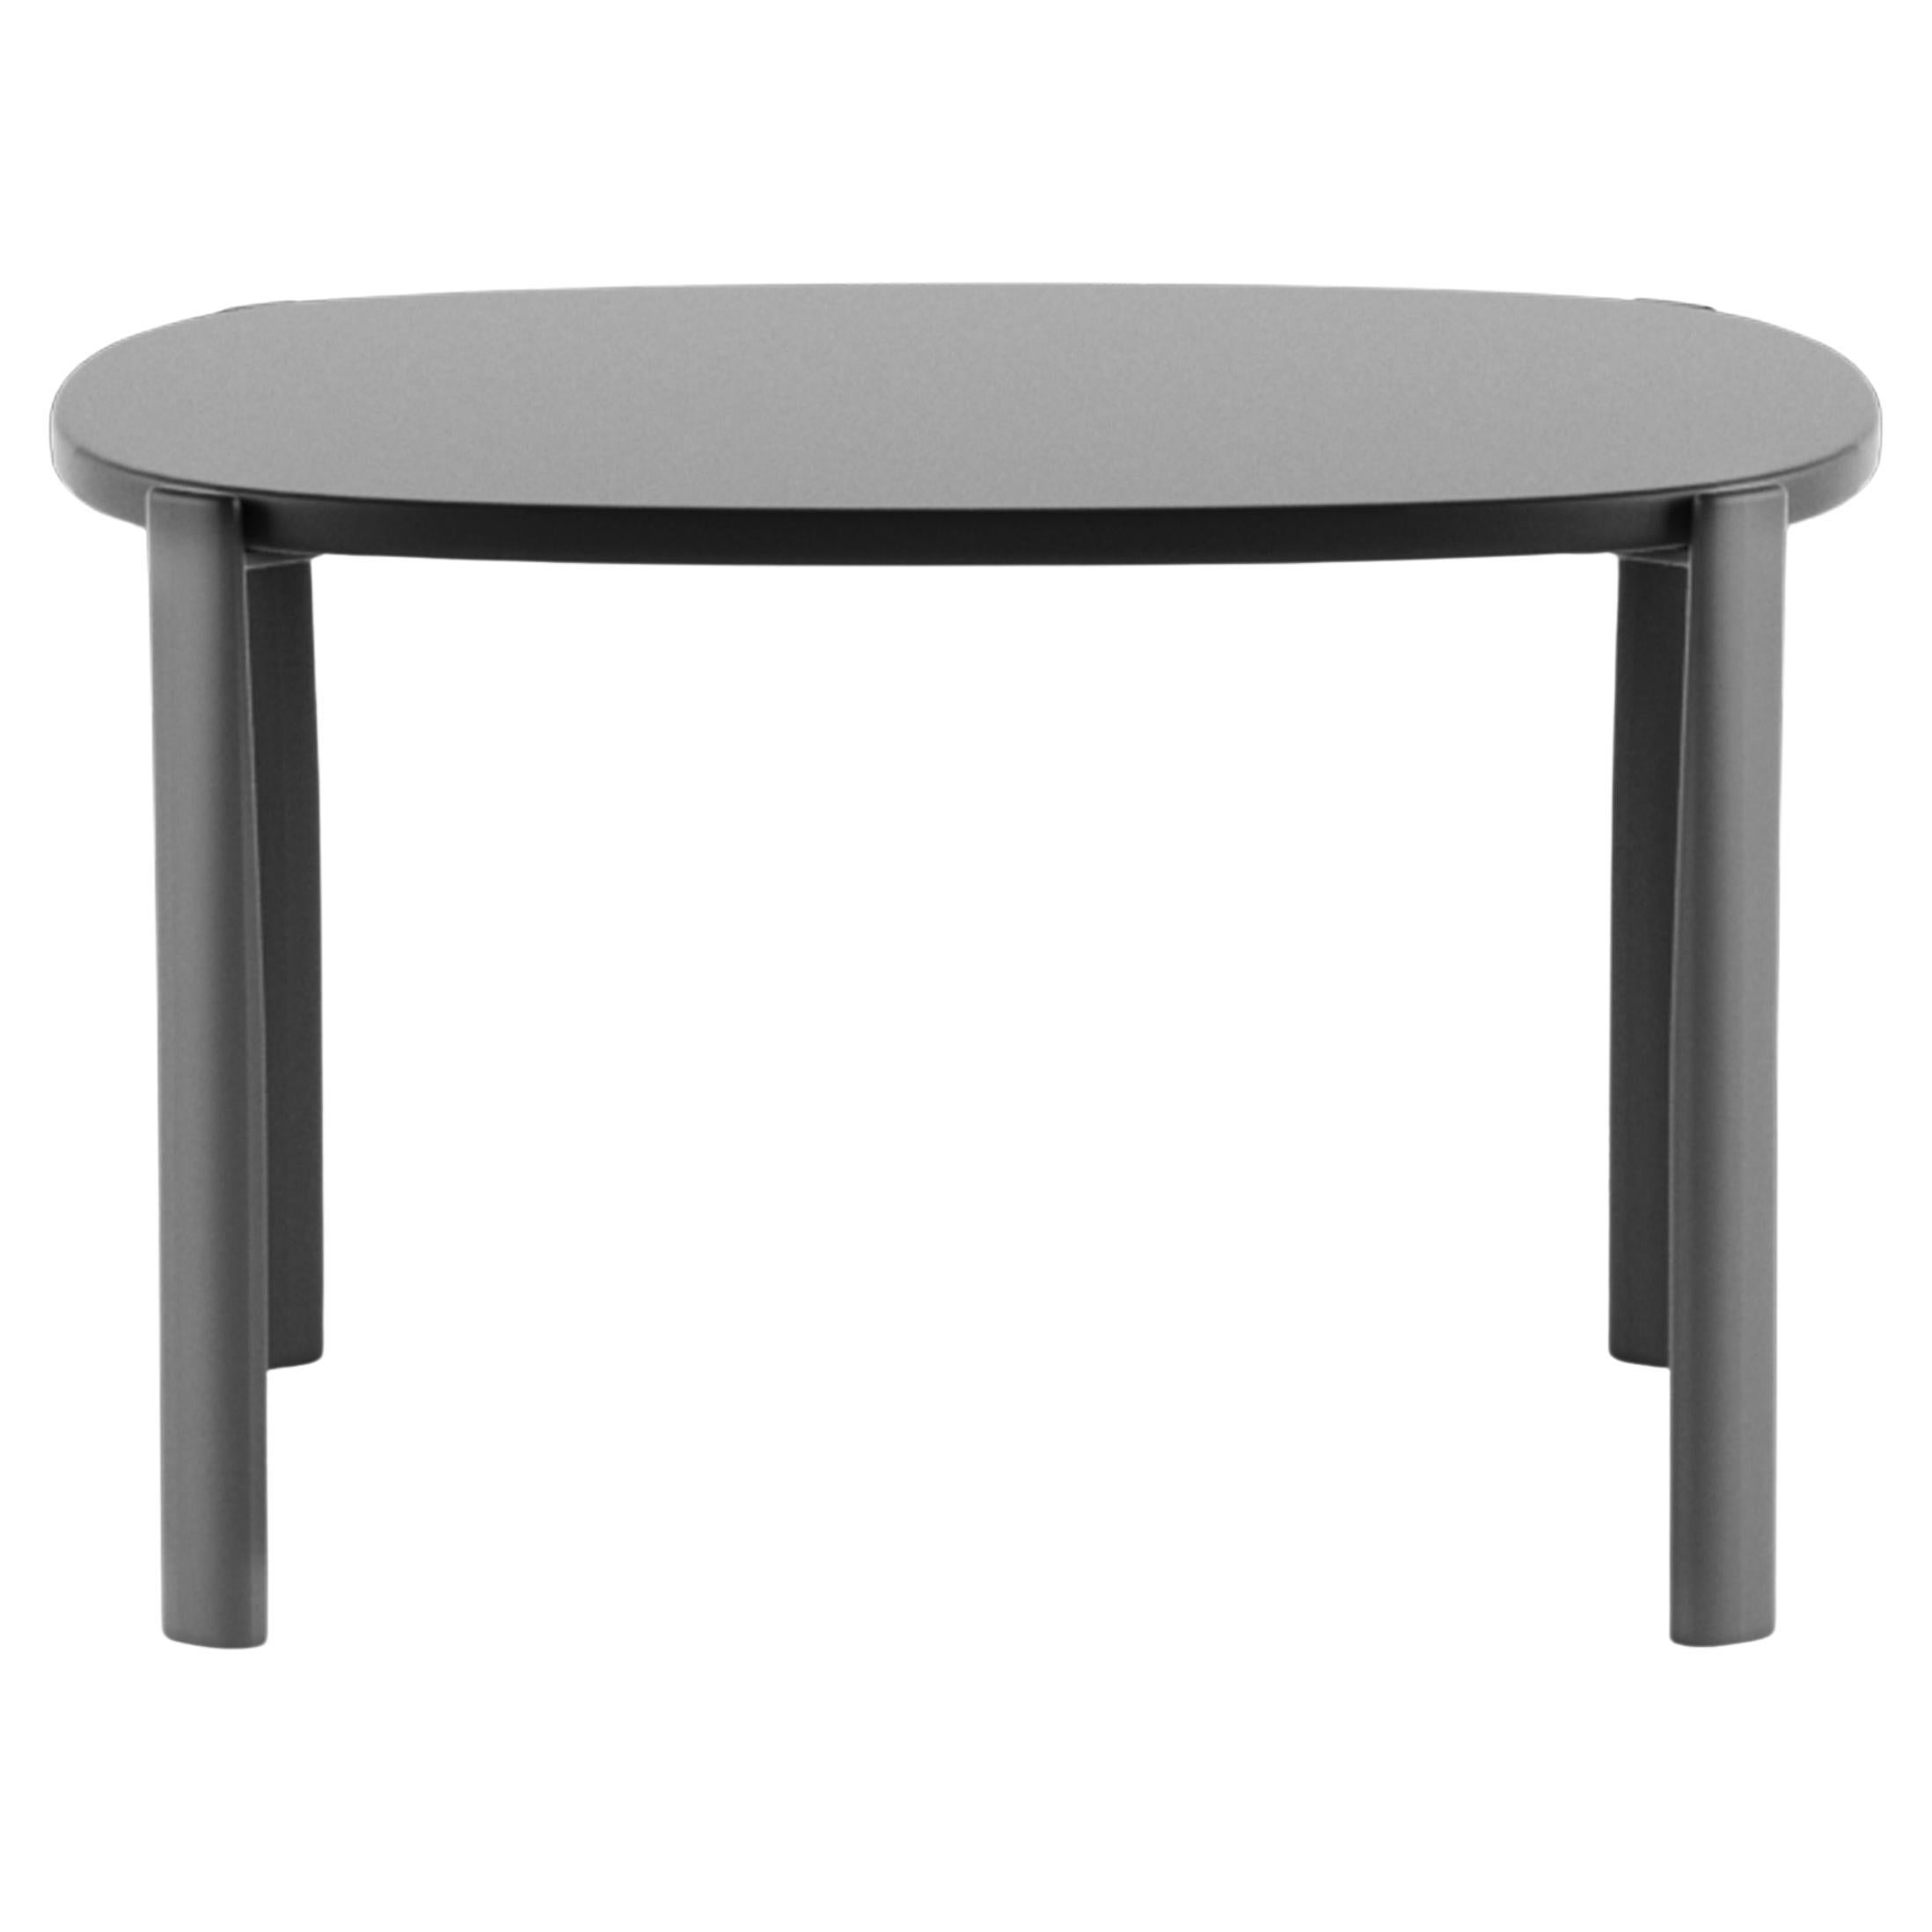 Alias T09_O Ten Outdoor Table 60x60 in Grey Glazed Ceramic Top w Lacquered Frame For Sale